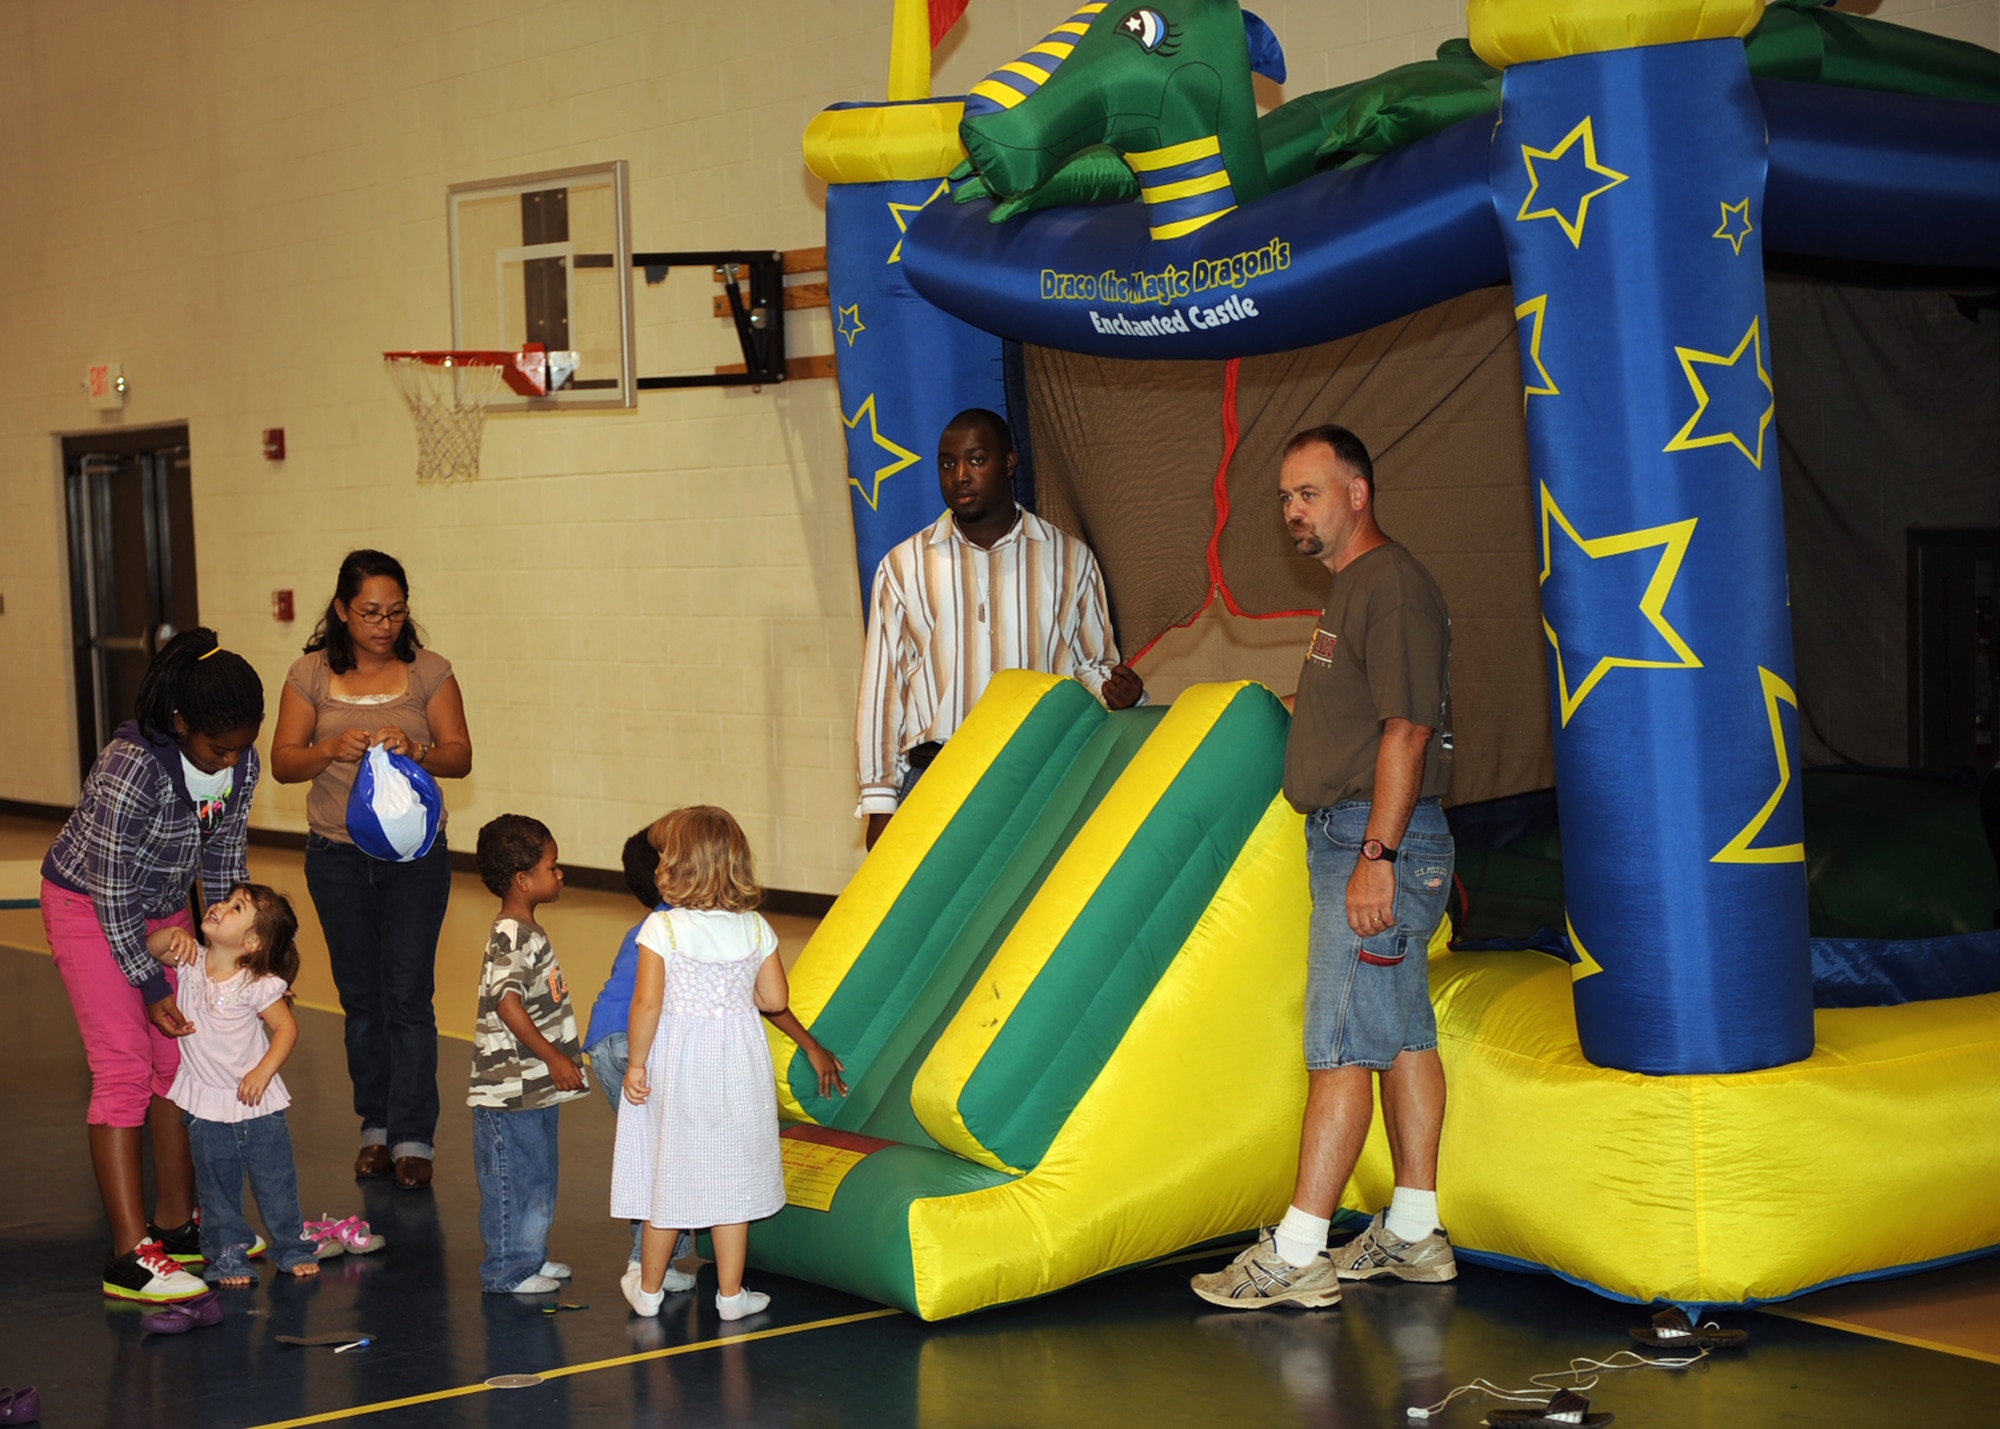 Base youth wait their turn to enter the bouncy castle at the Yellow Ribbon event/Worldwide Day of Play held at the Youth Center on Seymour Johnson Air Force Base, N.C., Sept. 25, 2009. The event was held to give parents an opportunity to socialize with other parents and give children a chance to play together. (U.S. Air Force/Senior Airman Ciara Wymbs)